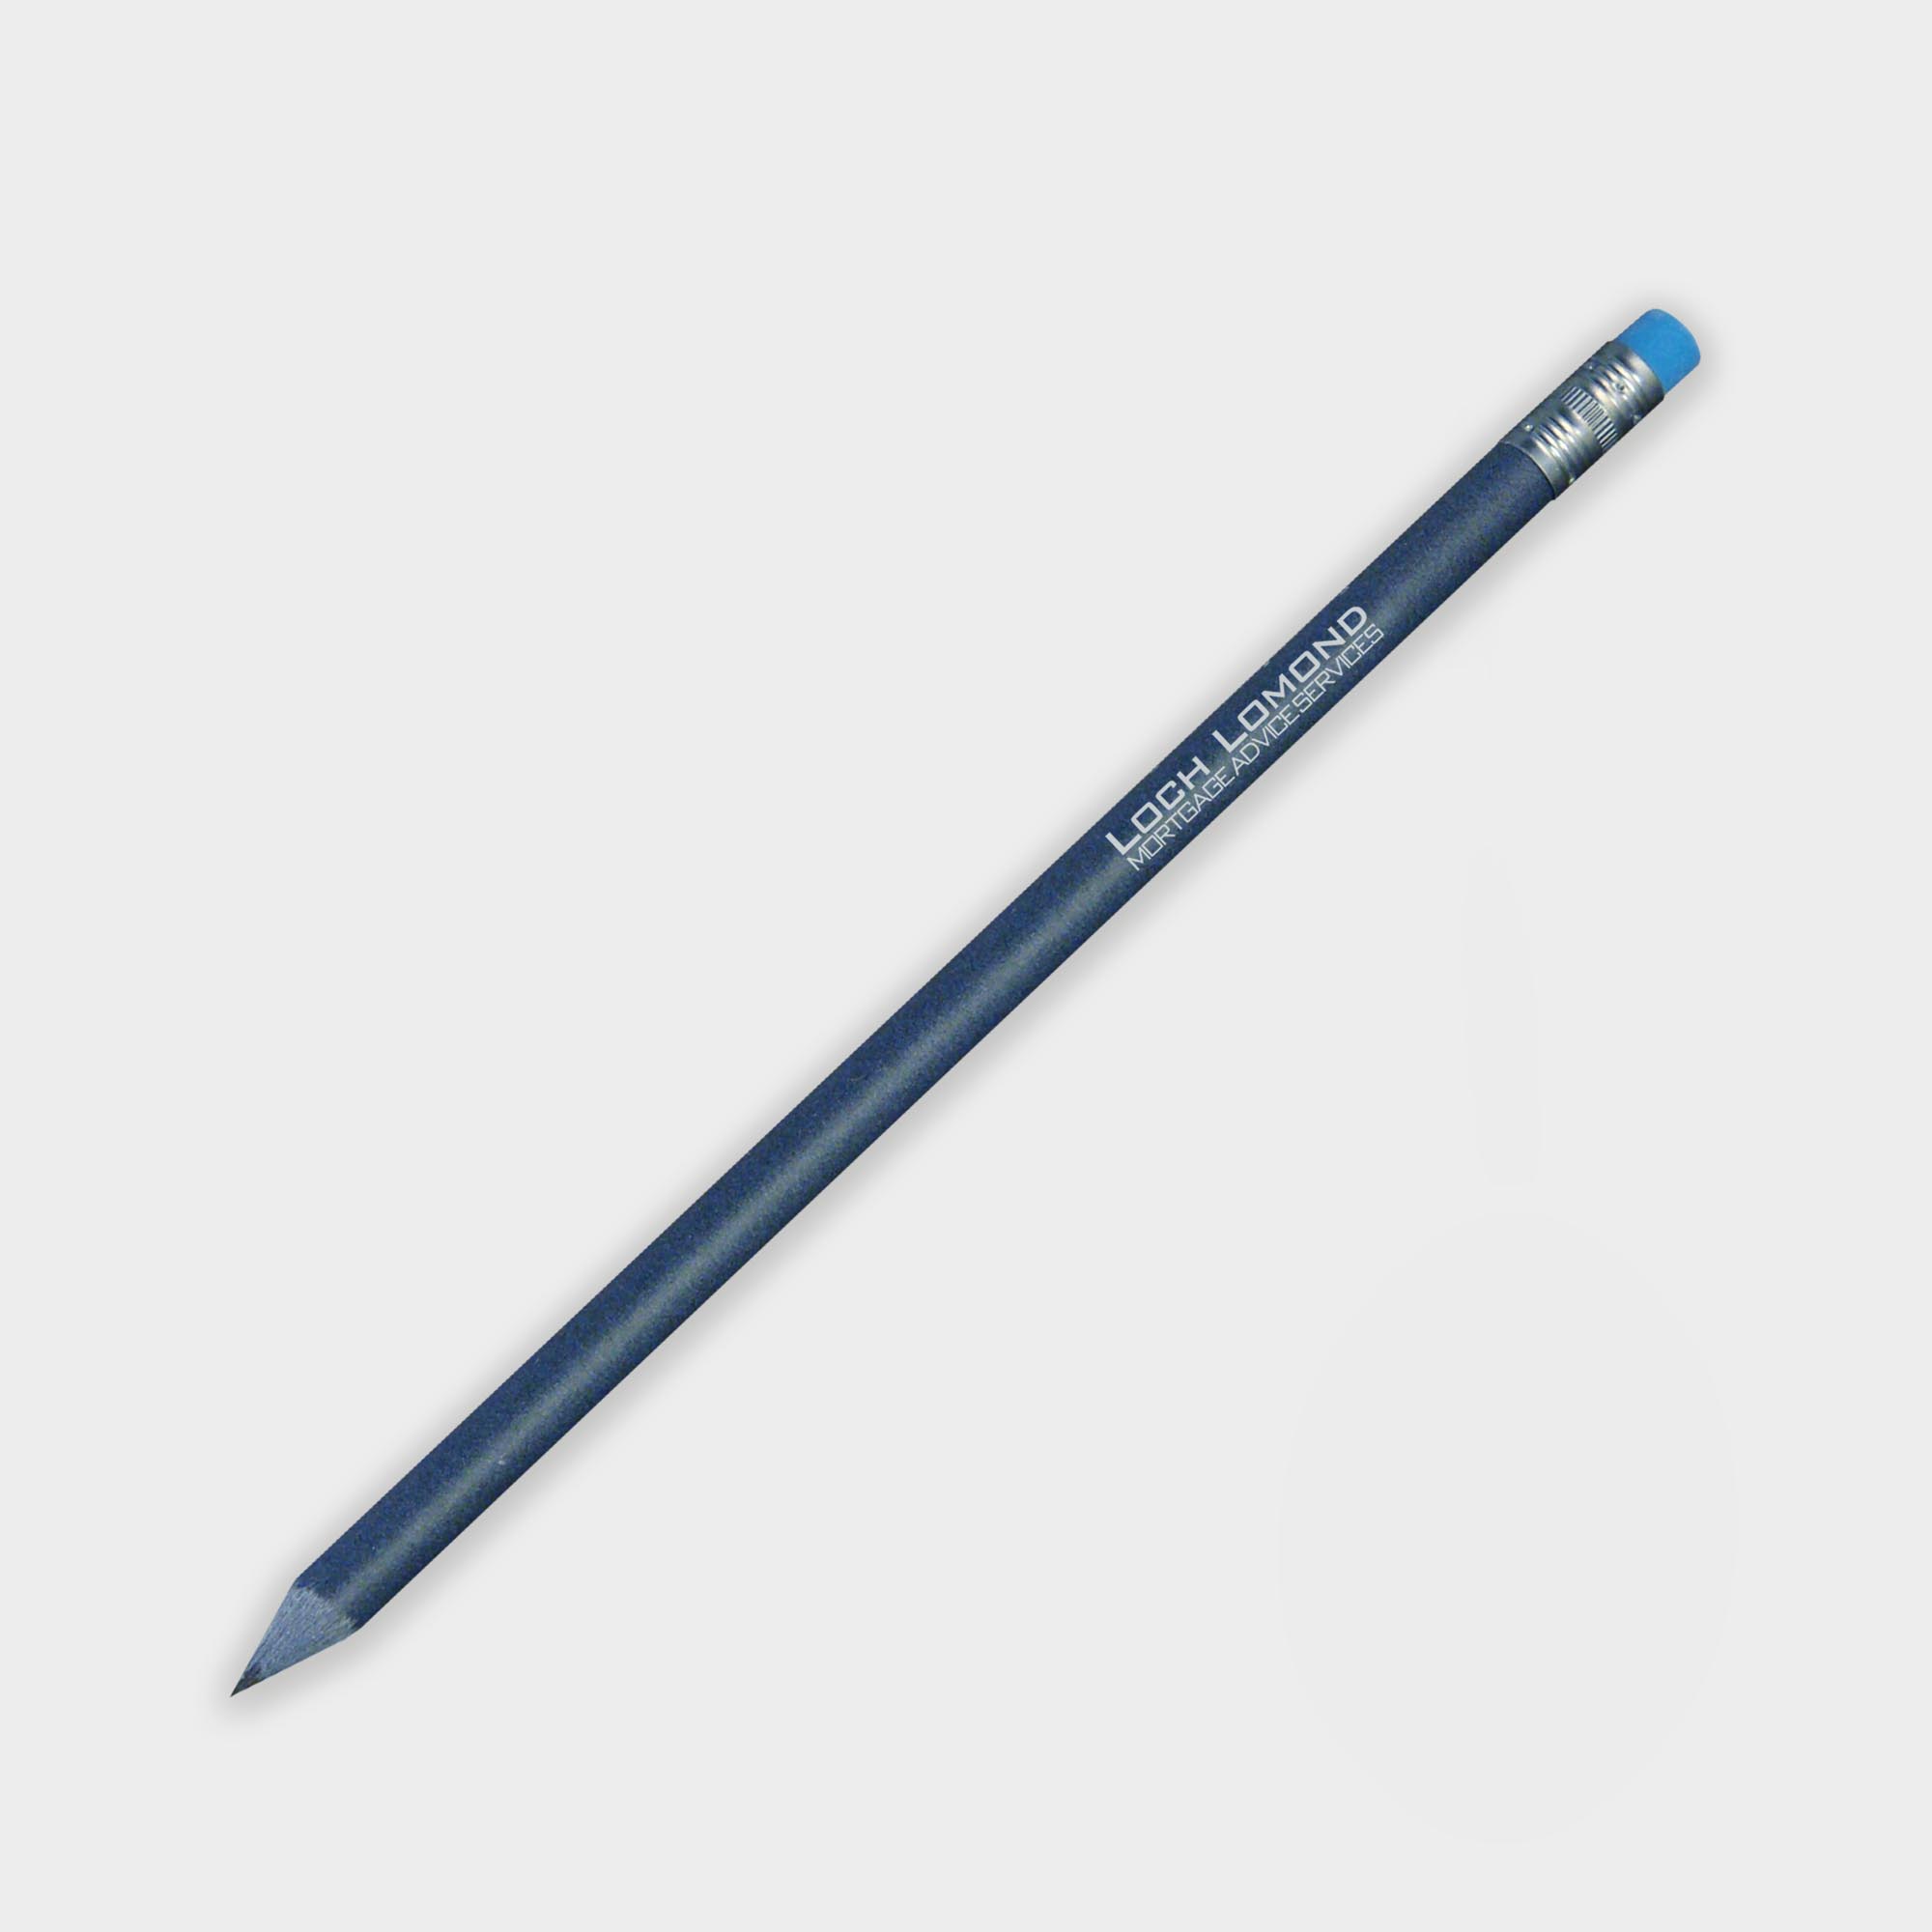 The Green & Good Recycled Denim Pencil is the ideal give-away for a fashion, clothing or denim brand. It is made from 30% recycled denim and 70% recycled polystyrene. Comes in a blue colour with a silver-blue ferule and a blue eraser. Made in the USA.